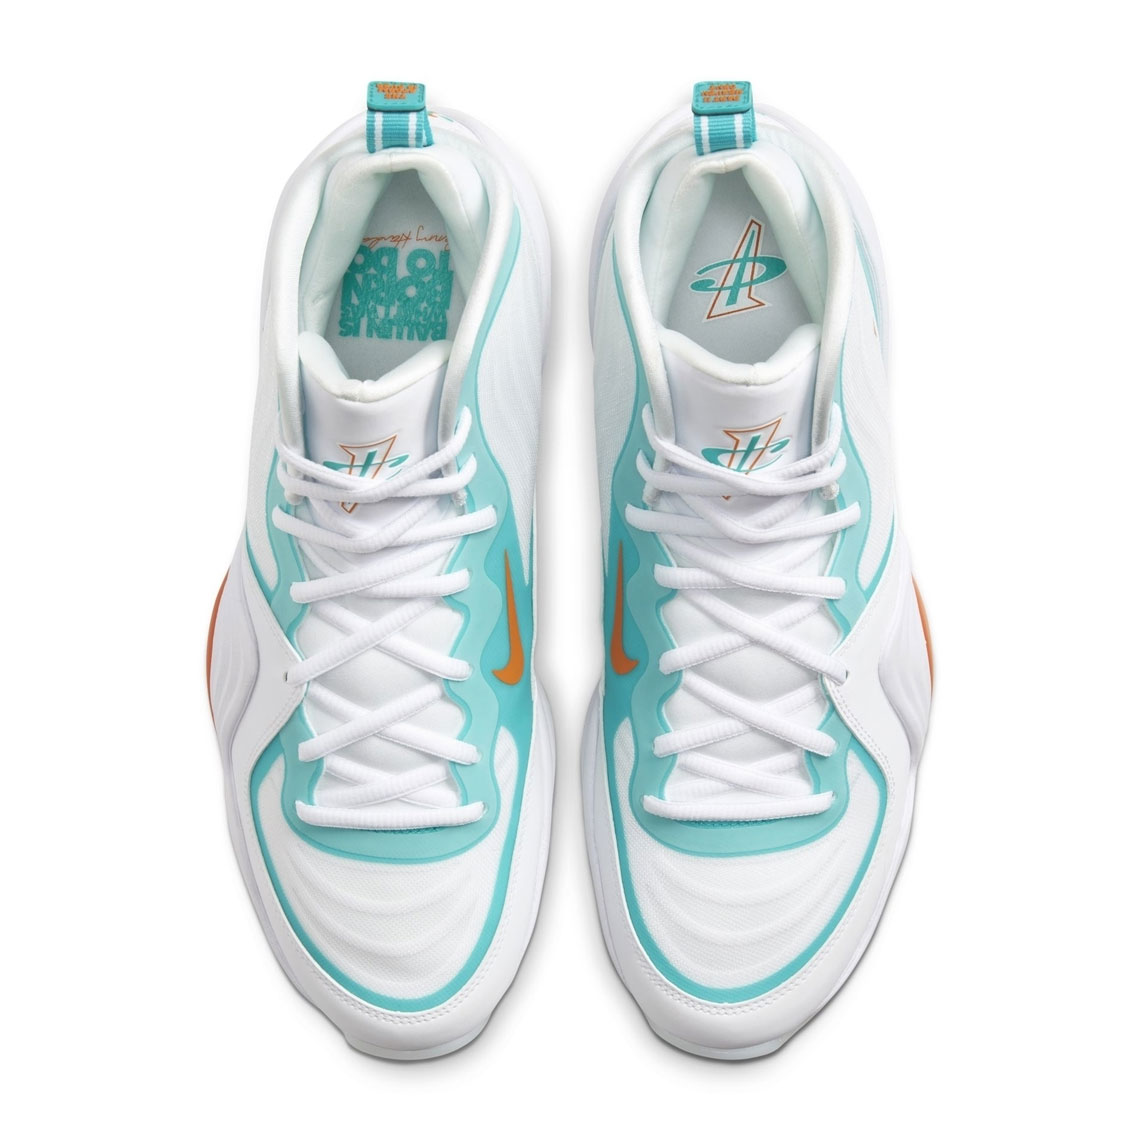 Nike Air Penny 5 White Teal Orange Dolphins 2020 7